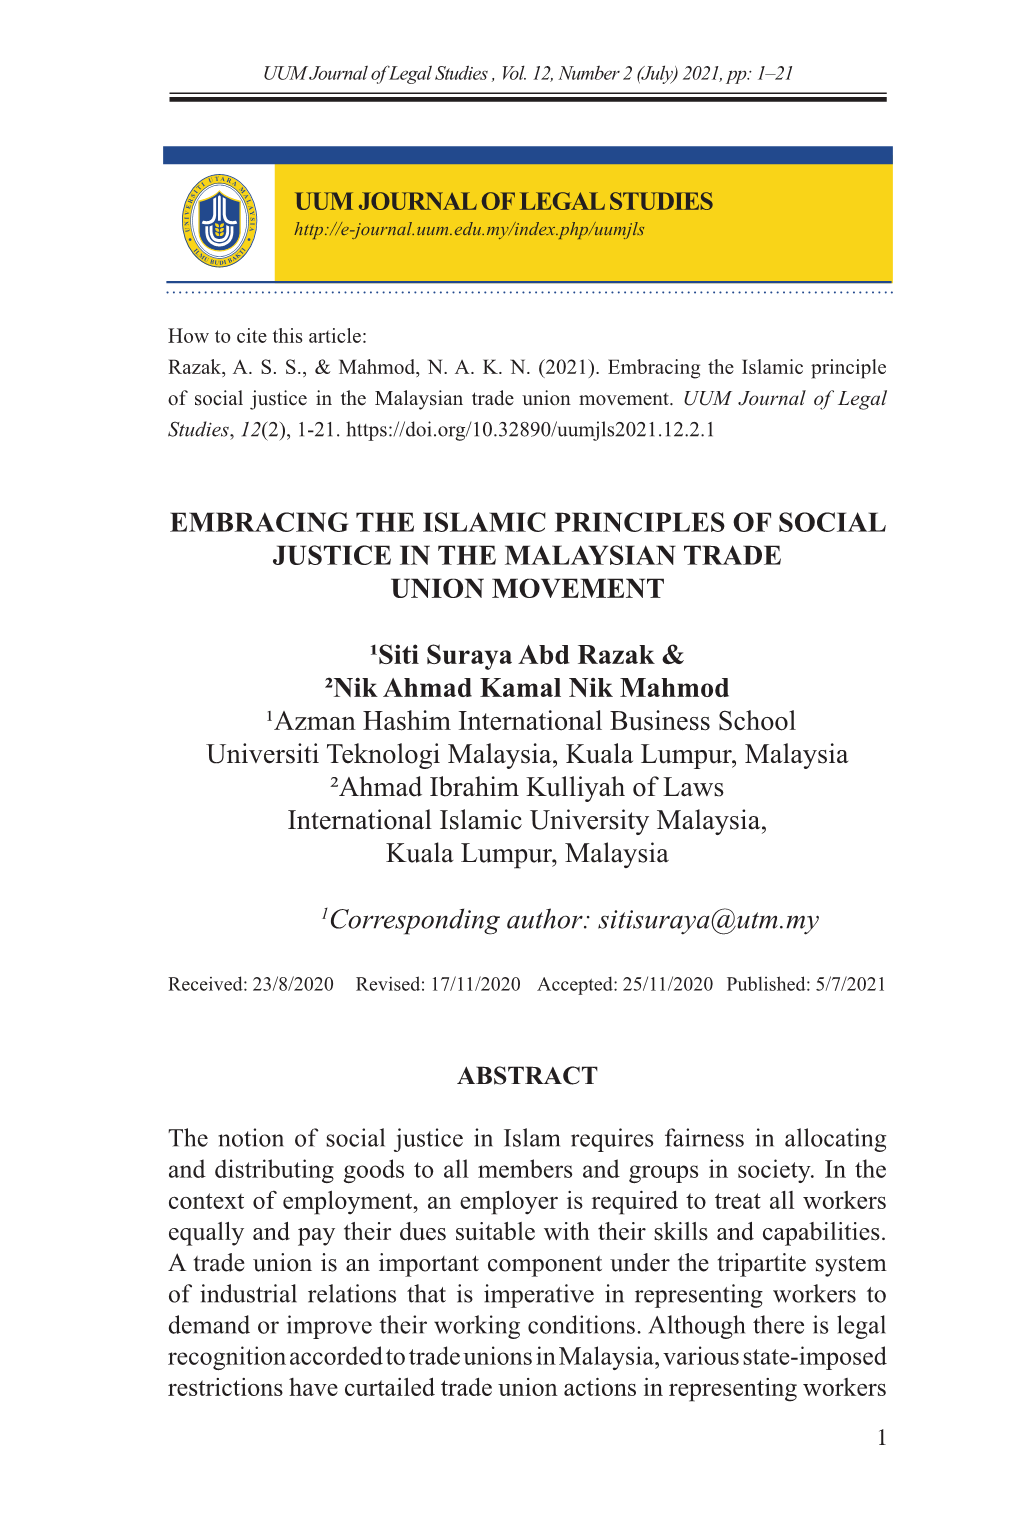 Embracing the Islamic Principles of Social Justice in the Malaysian Trade Union Movement